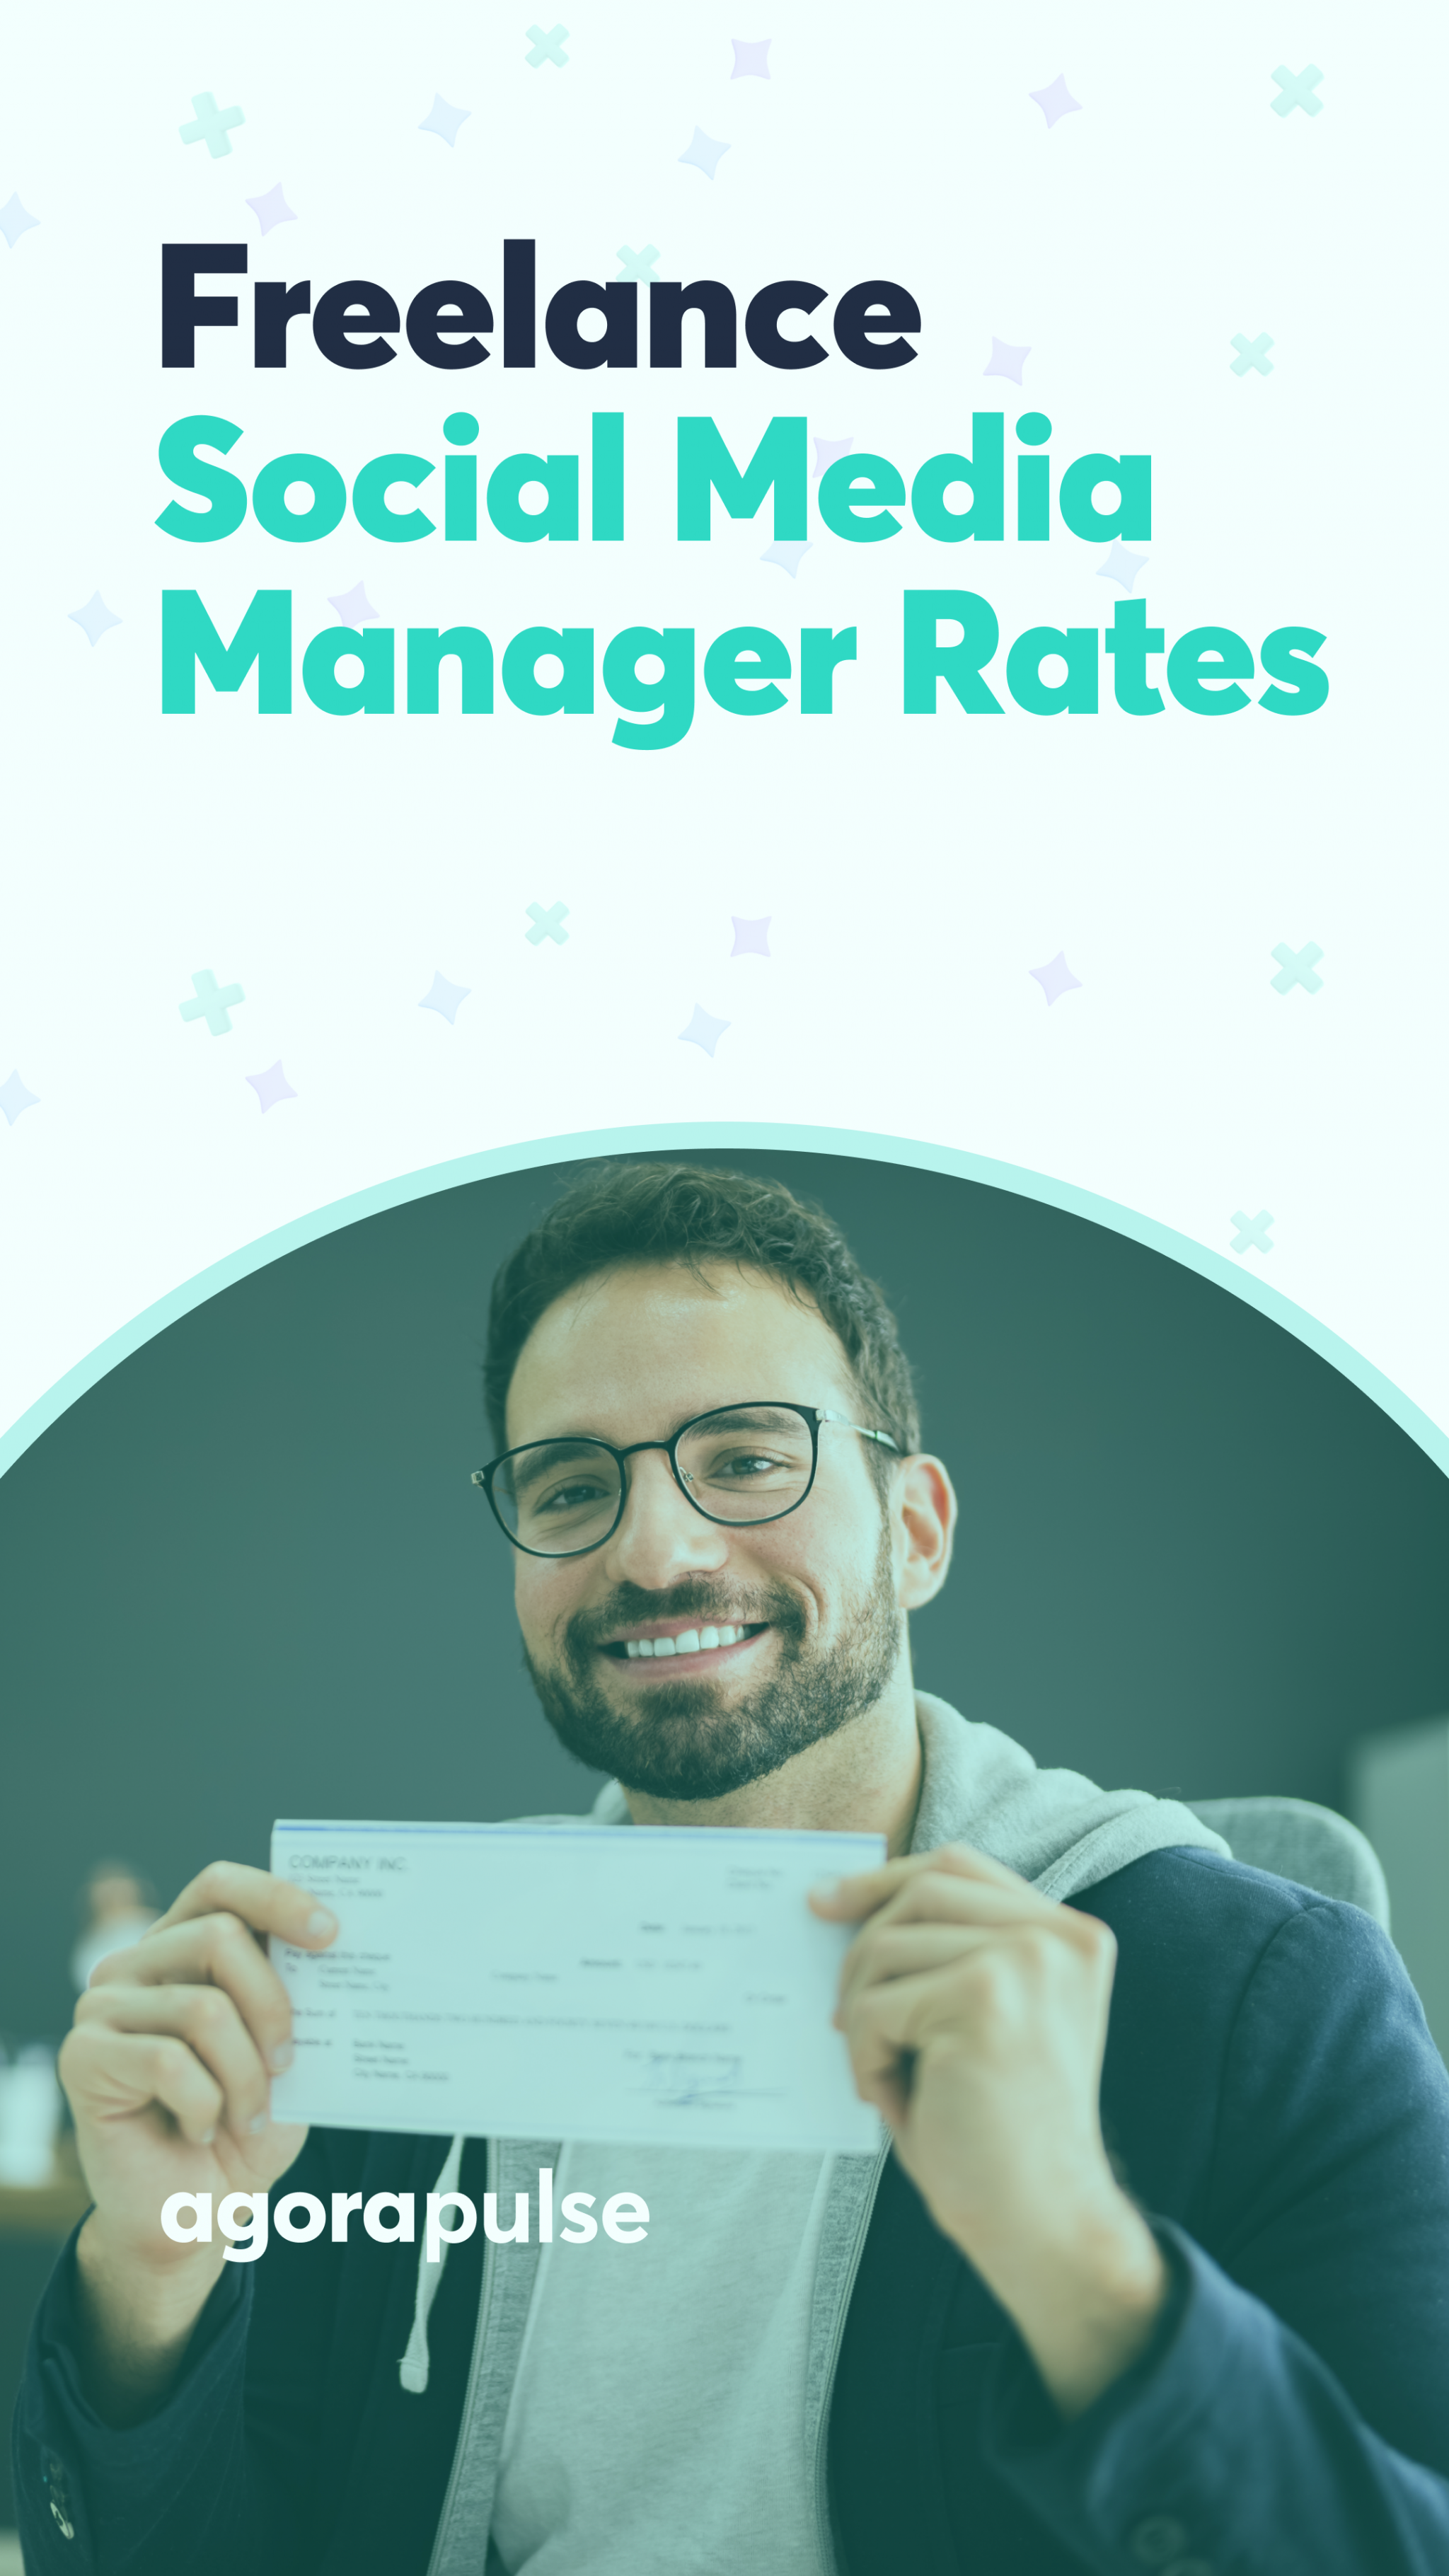 Freelance Social Media Manager Rates: What Are People Being Paid?